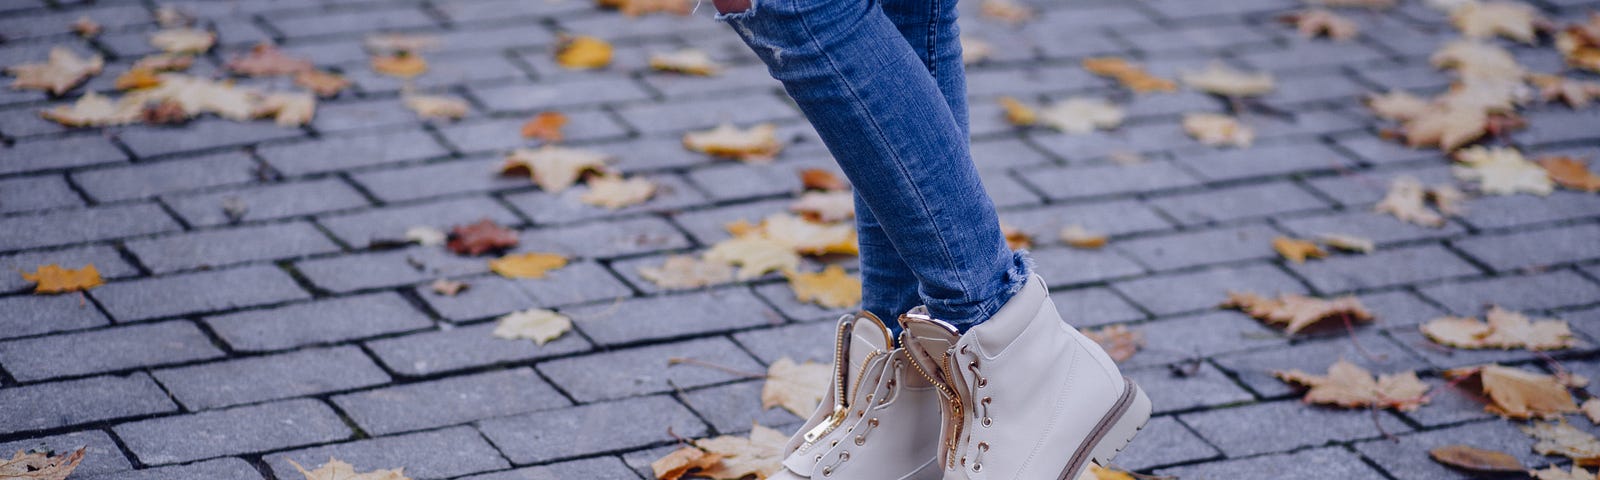 A woman wearing ripped jeans and white sneakers